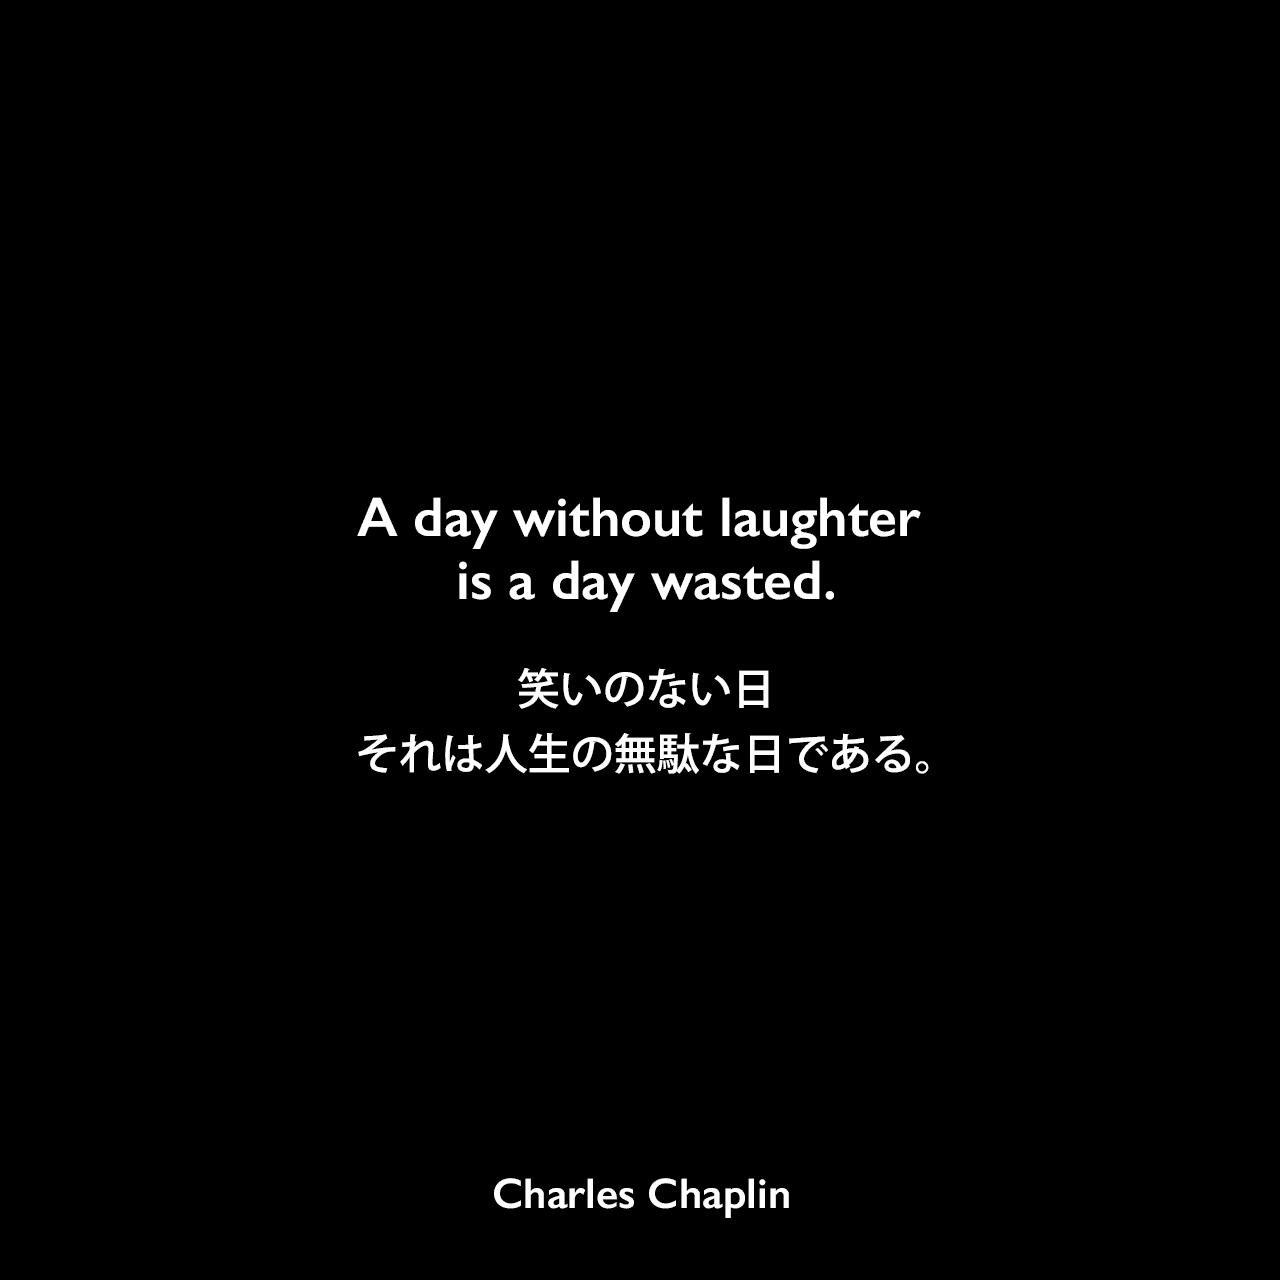 A day without laughter is a day wasted.笑いのない日、それは人生の無駄な日である。- 映画「独裁者」の有名なスピーチCharles Chaplin